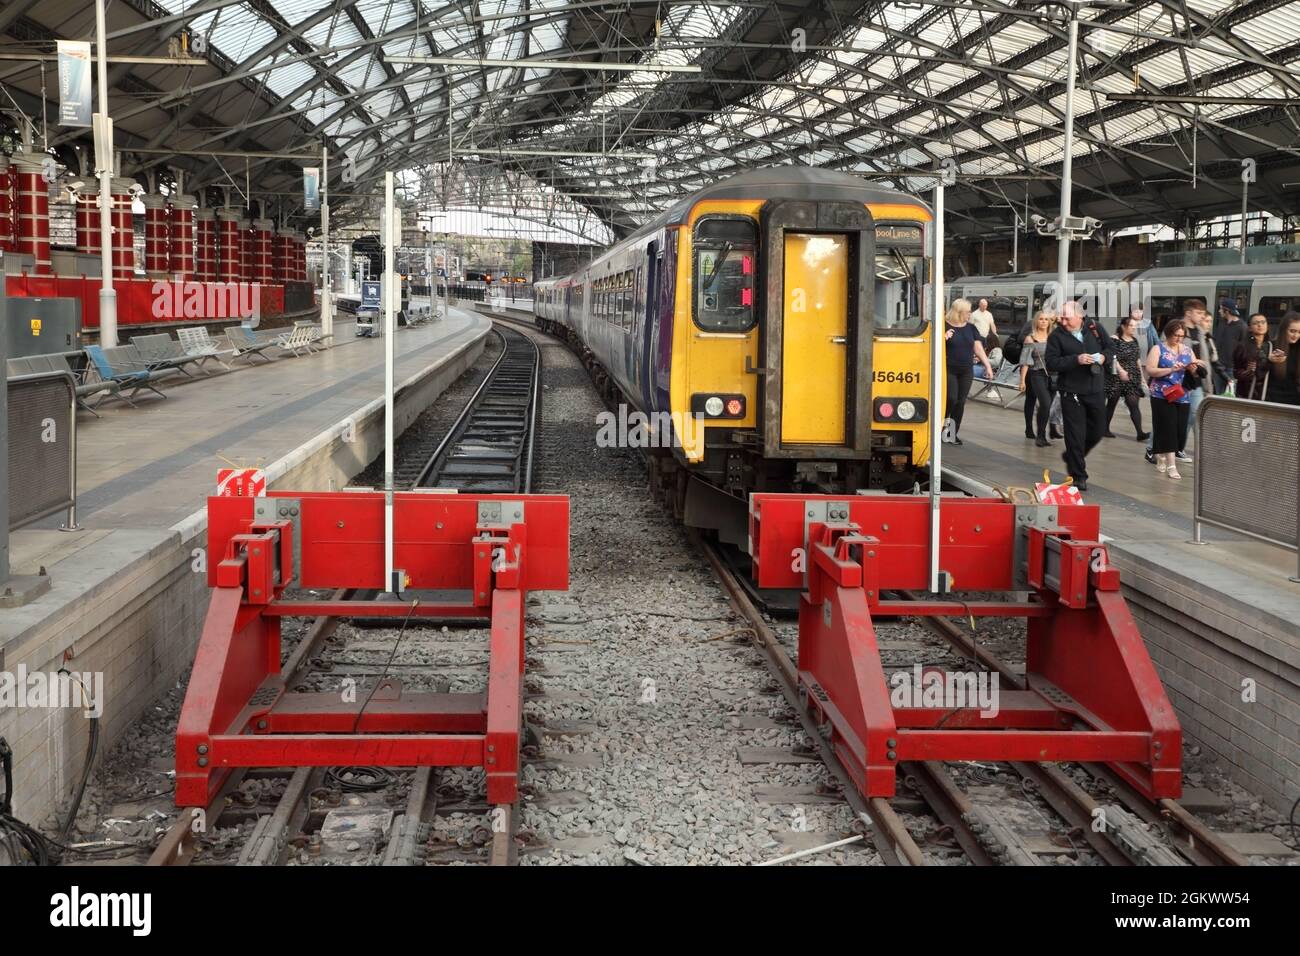 Northern Class 156 diesel multiple unit no. 156461 at Liverpool Lime Street station, UK. Stock Photo